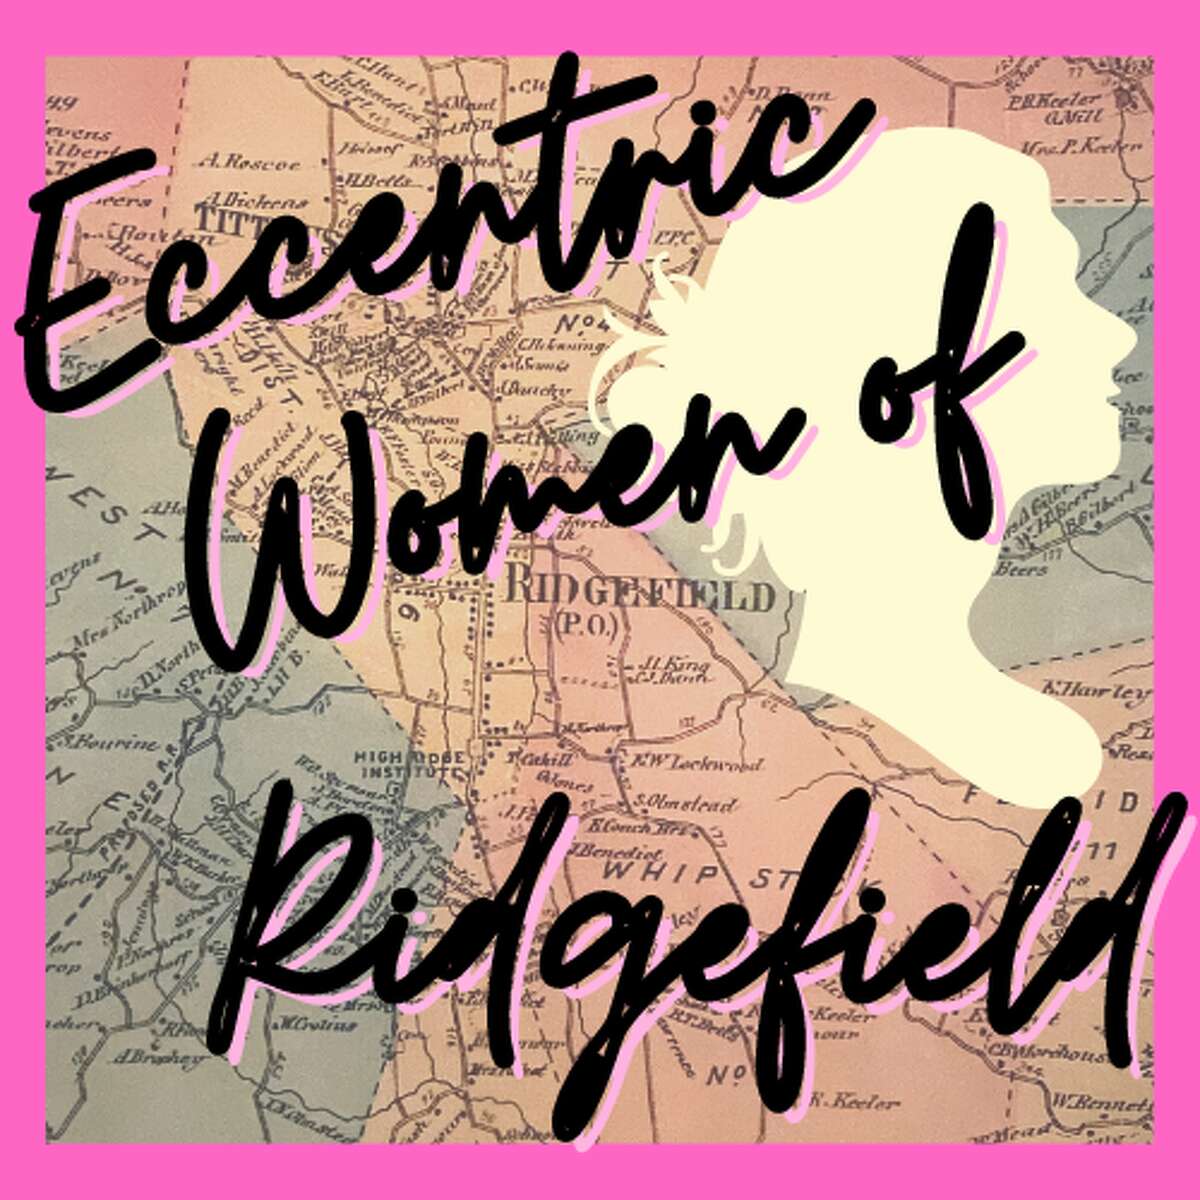 "Eccentric Women of Ridgefield," a joint project of the Ridgefield Theater Barn and the Ridgefield Historical Society, will be presented at The Meetinghouse Jan. 29 at 2 p.m. 